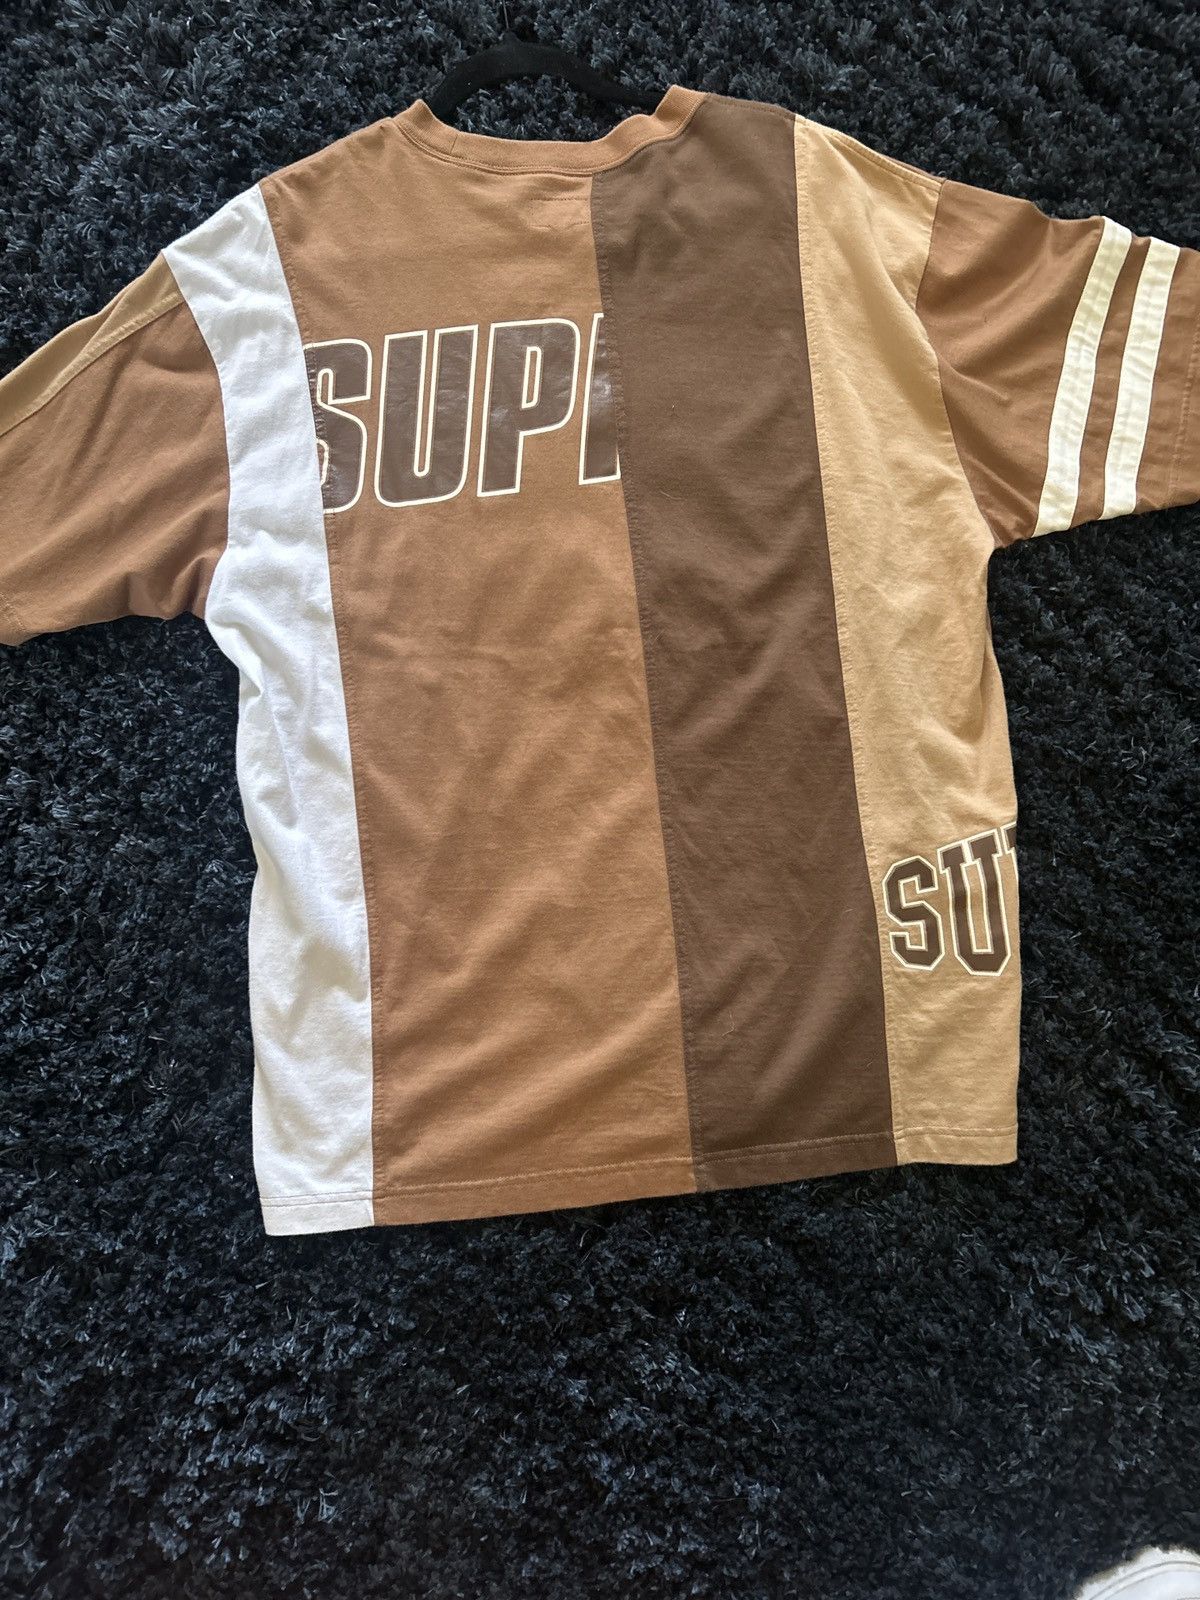 Supreme Supreme Reconstructed S/S Top Brown | Grailed